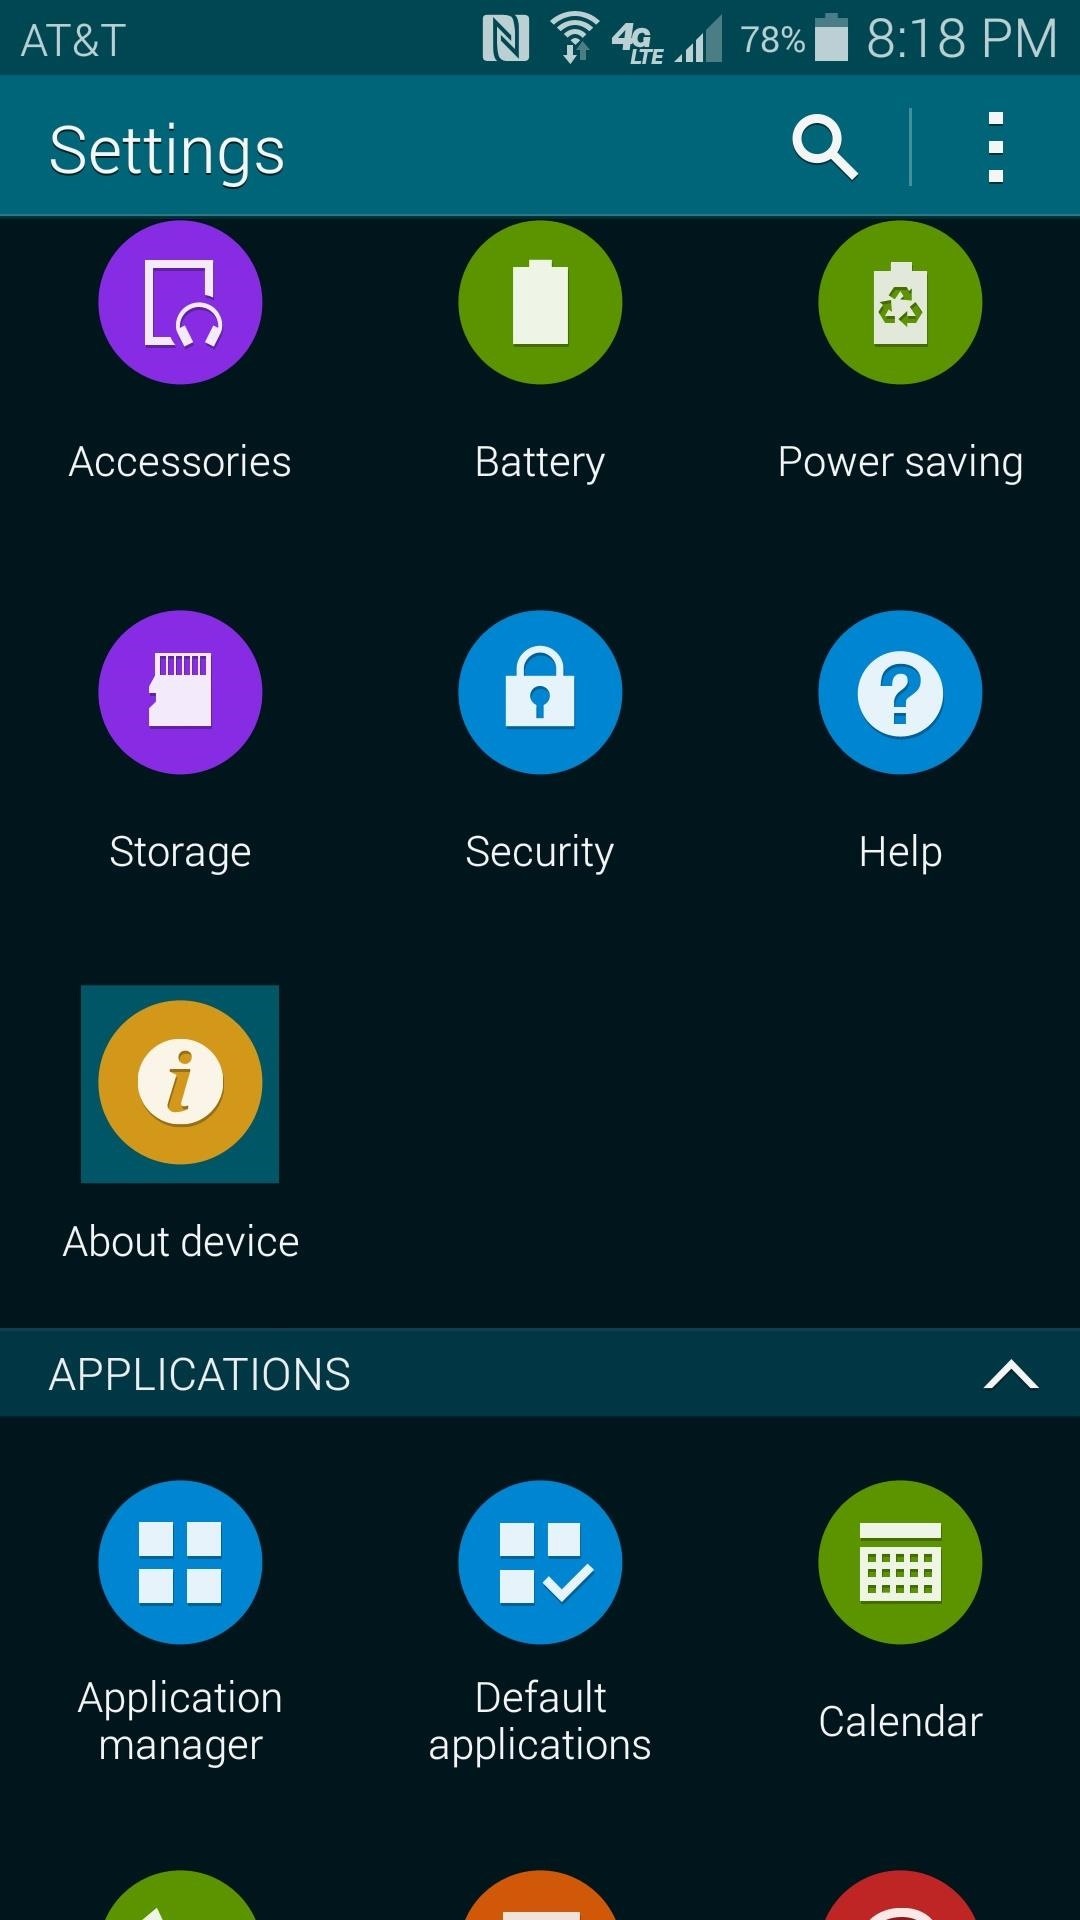 How to Install a Custom Recovery on Your Bootloader-Locked Galaxy S5 (AT&T or Verizon)